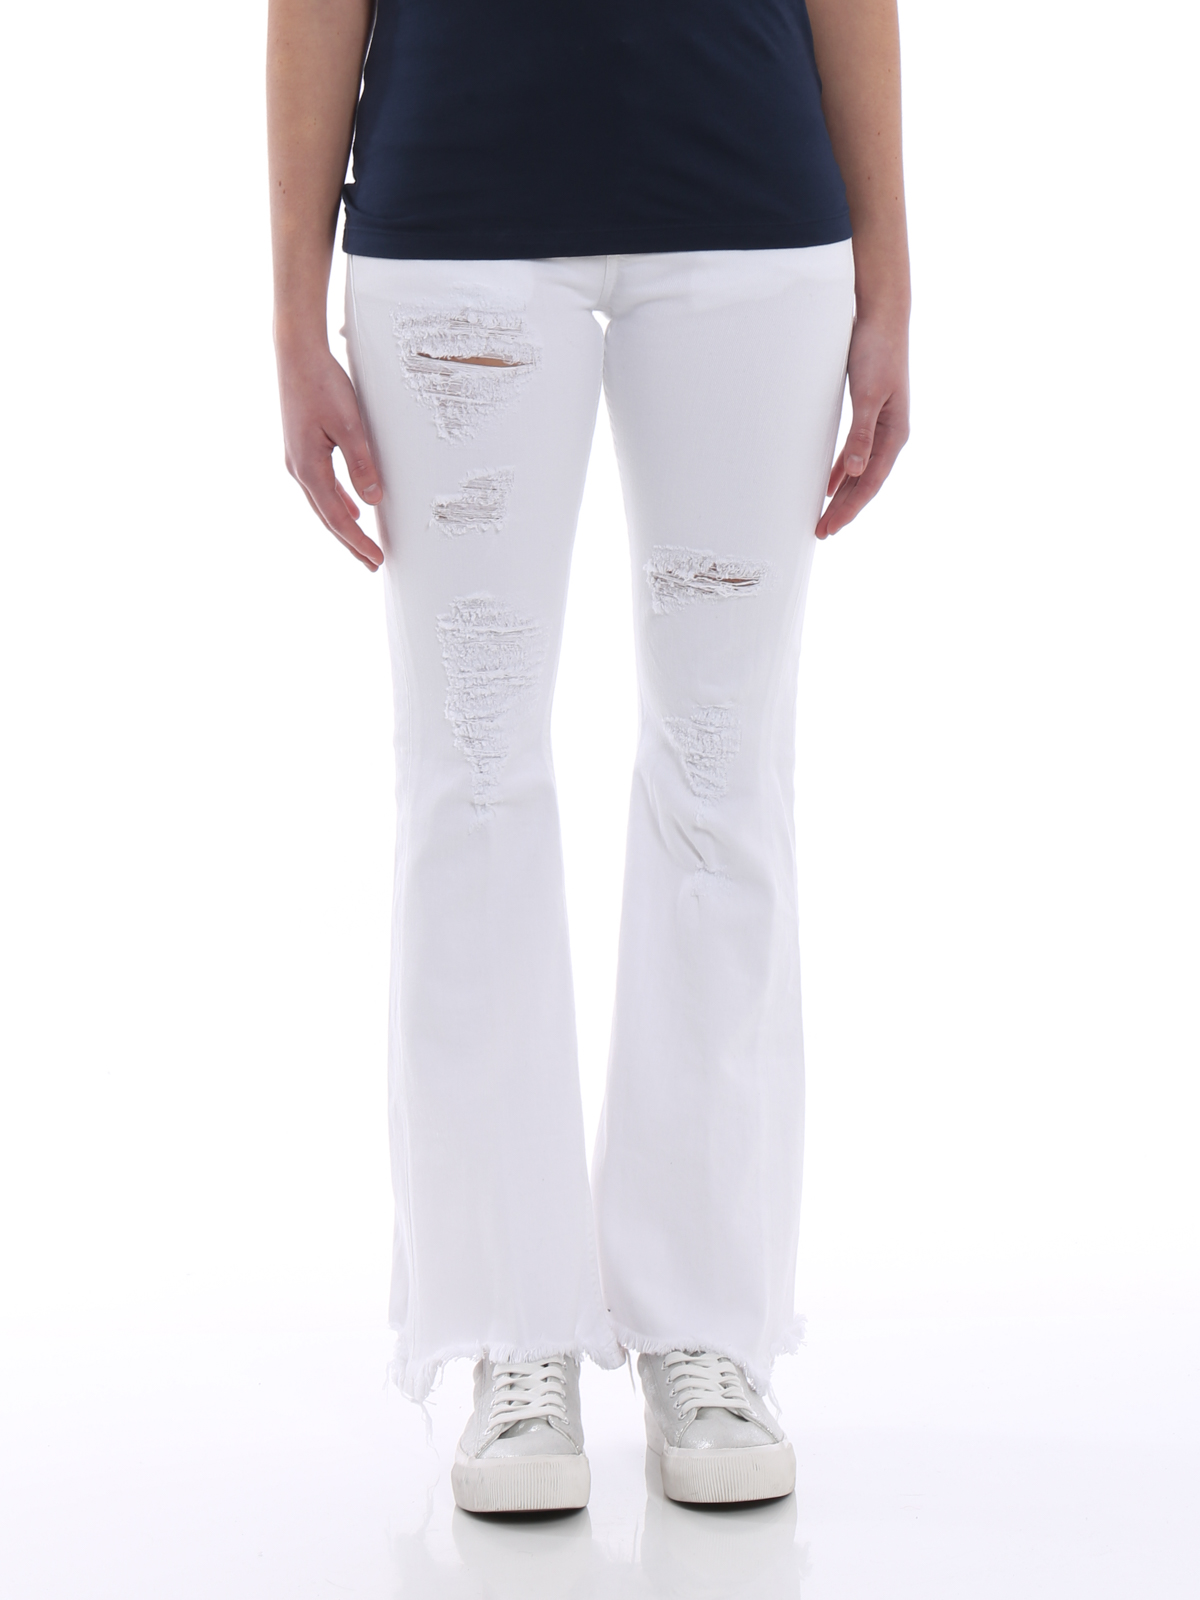 white high waisted bootcut jeans